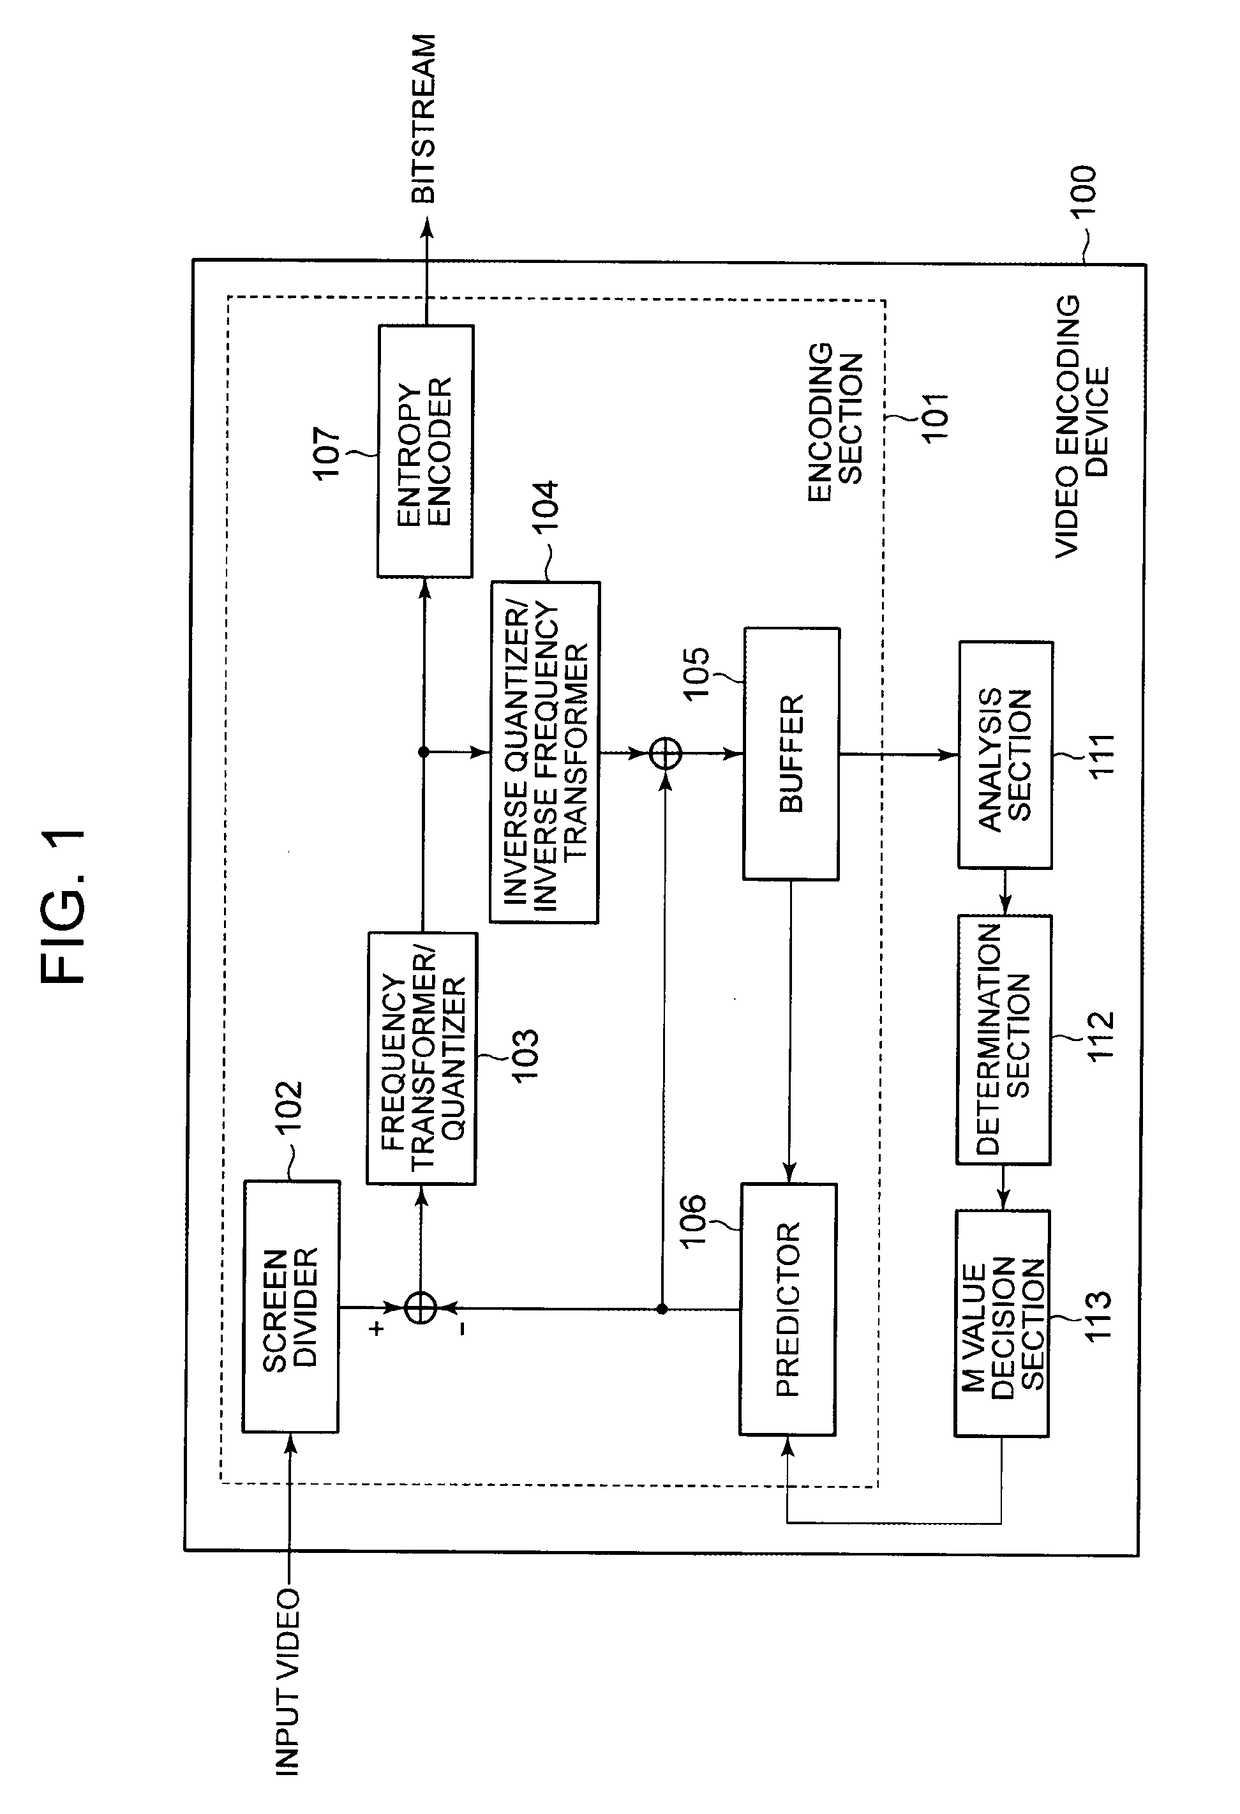 Video encoding method, video encoding device, video decoding method, video decoding device, program, and video system